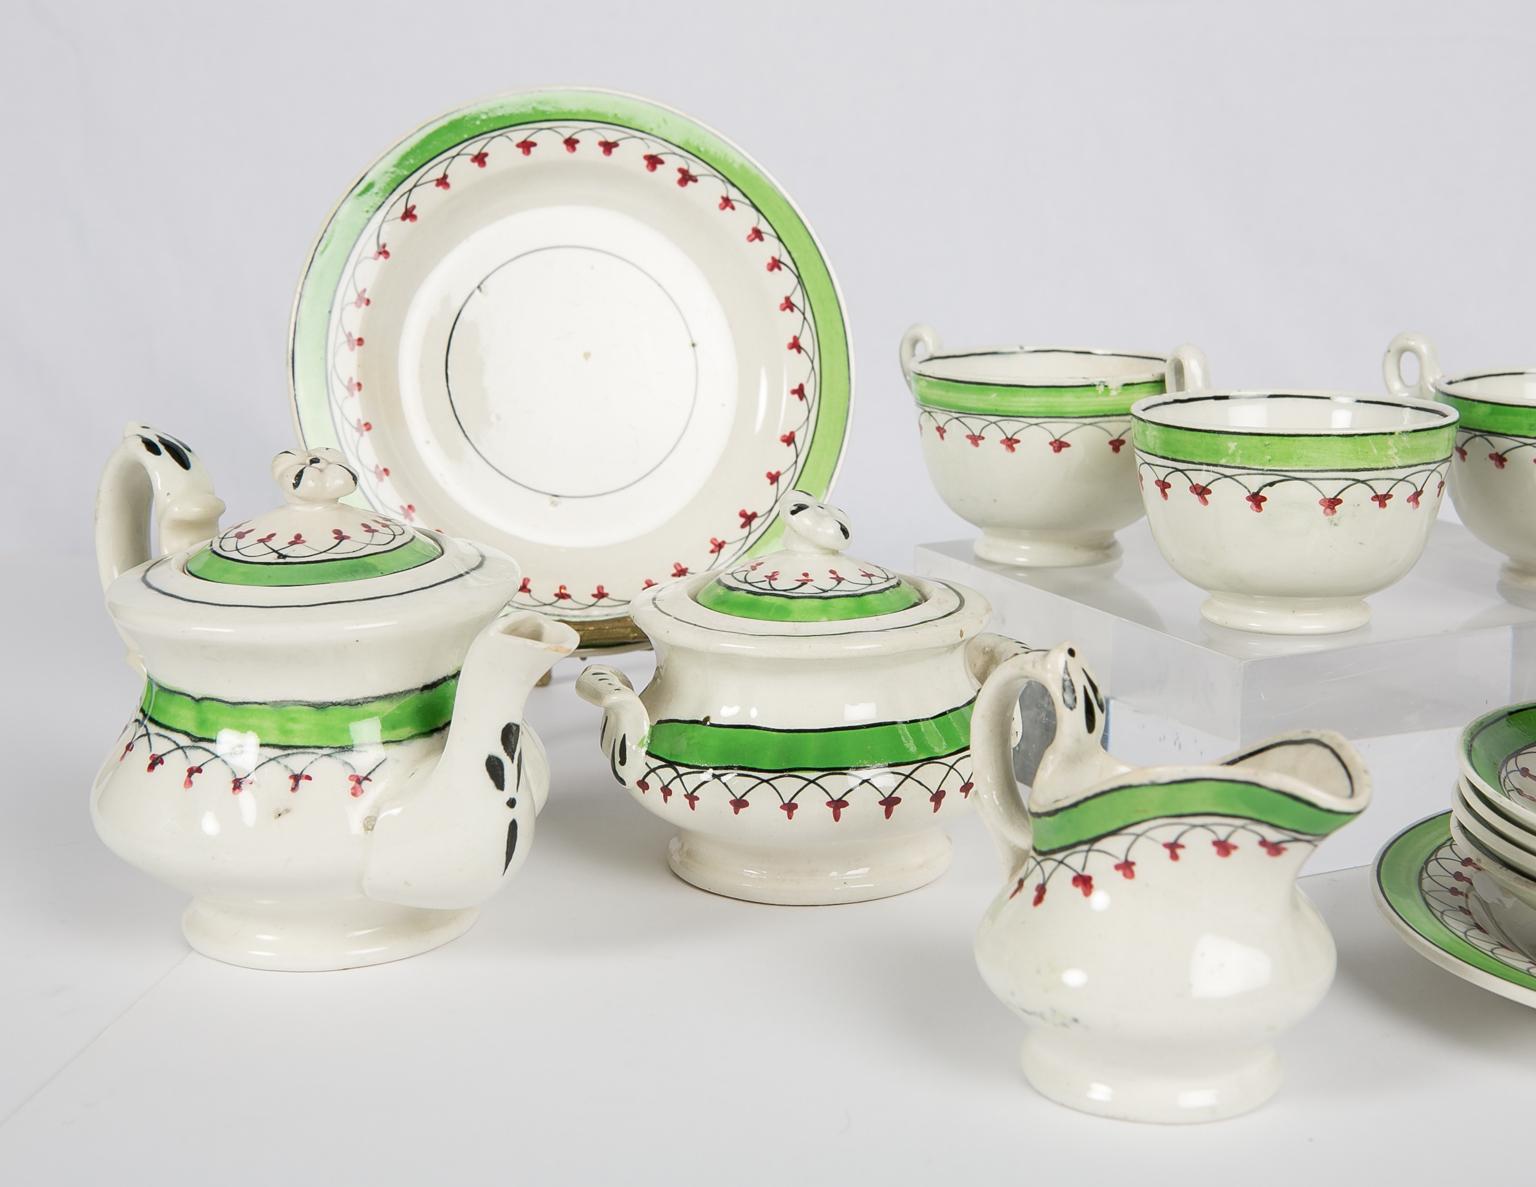 We are pleased to offer this charming antique child's tea set is painted with a lovely English green border, which is enhanced with red berries on a looped design.
The complete set consists of:
A tea pot,
 covered sugar bowl,
a milk pitcher,
 two